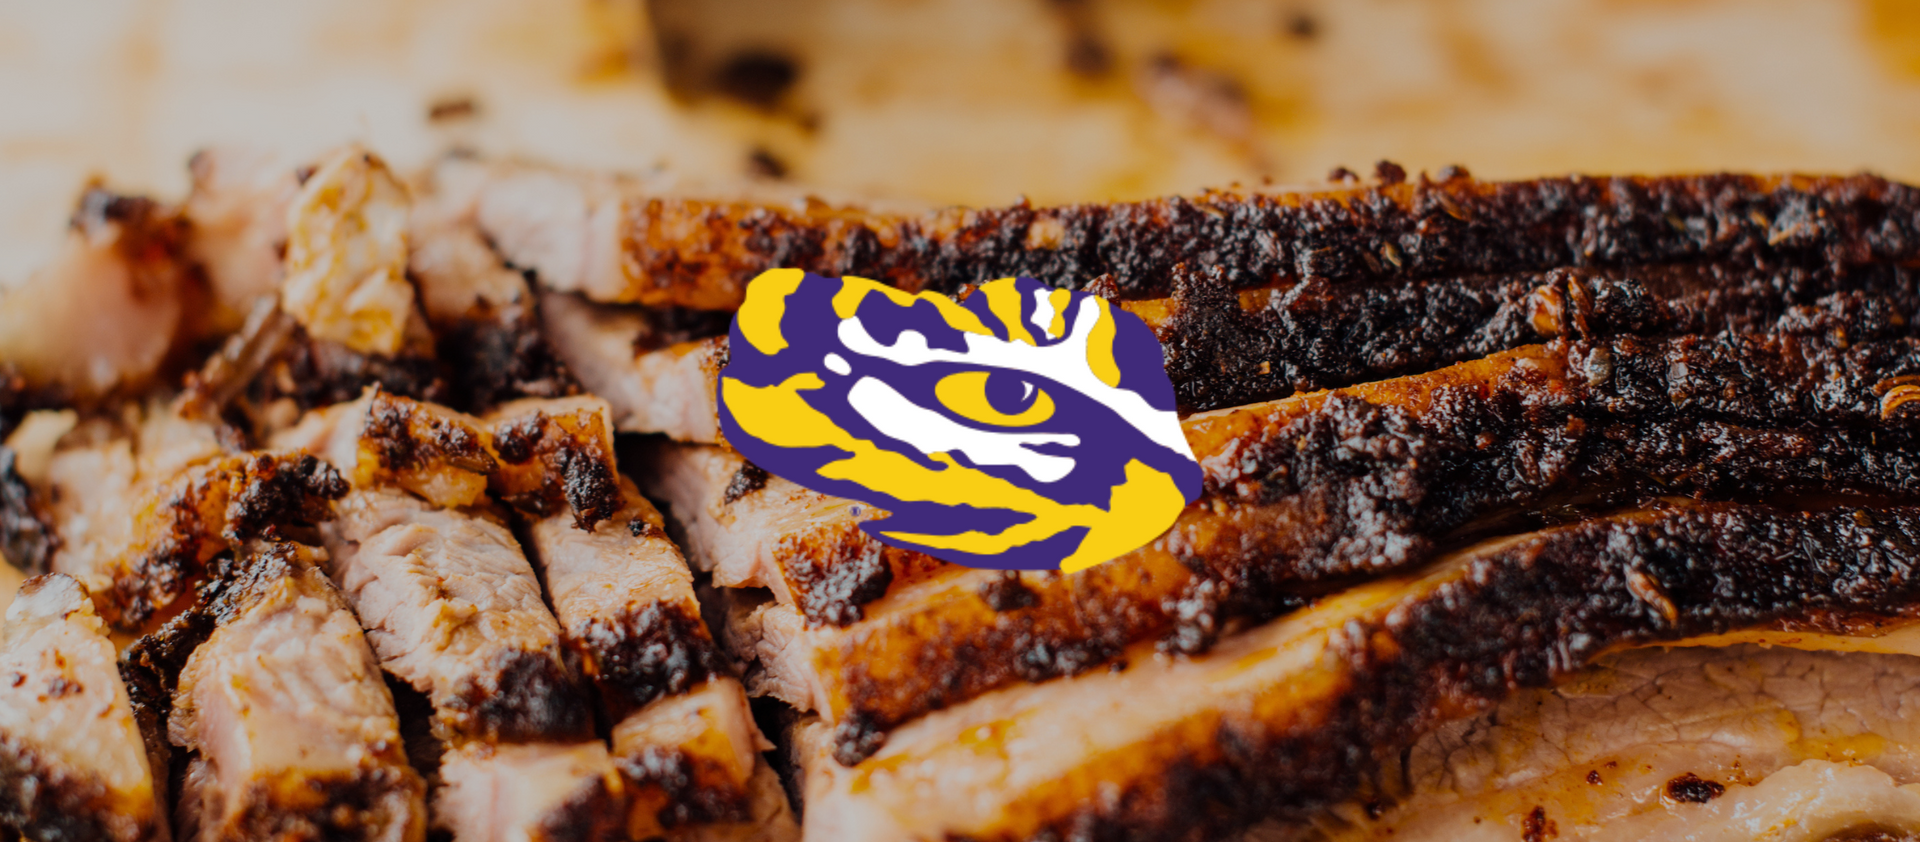 BRQ Seafood and Barbeque Partner with LSU Athletics